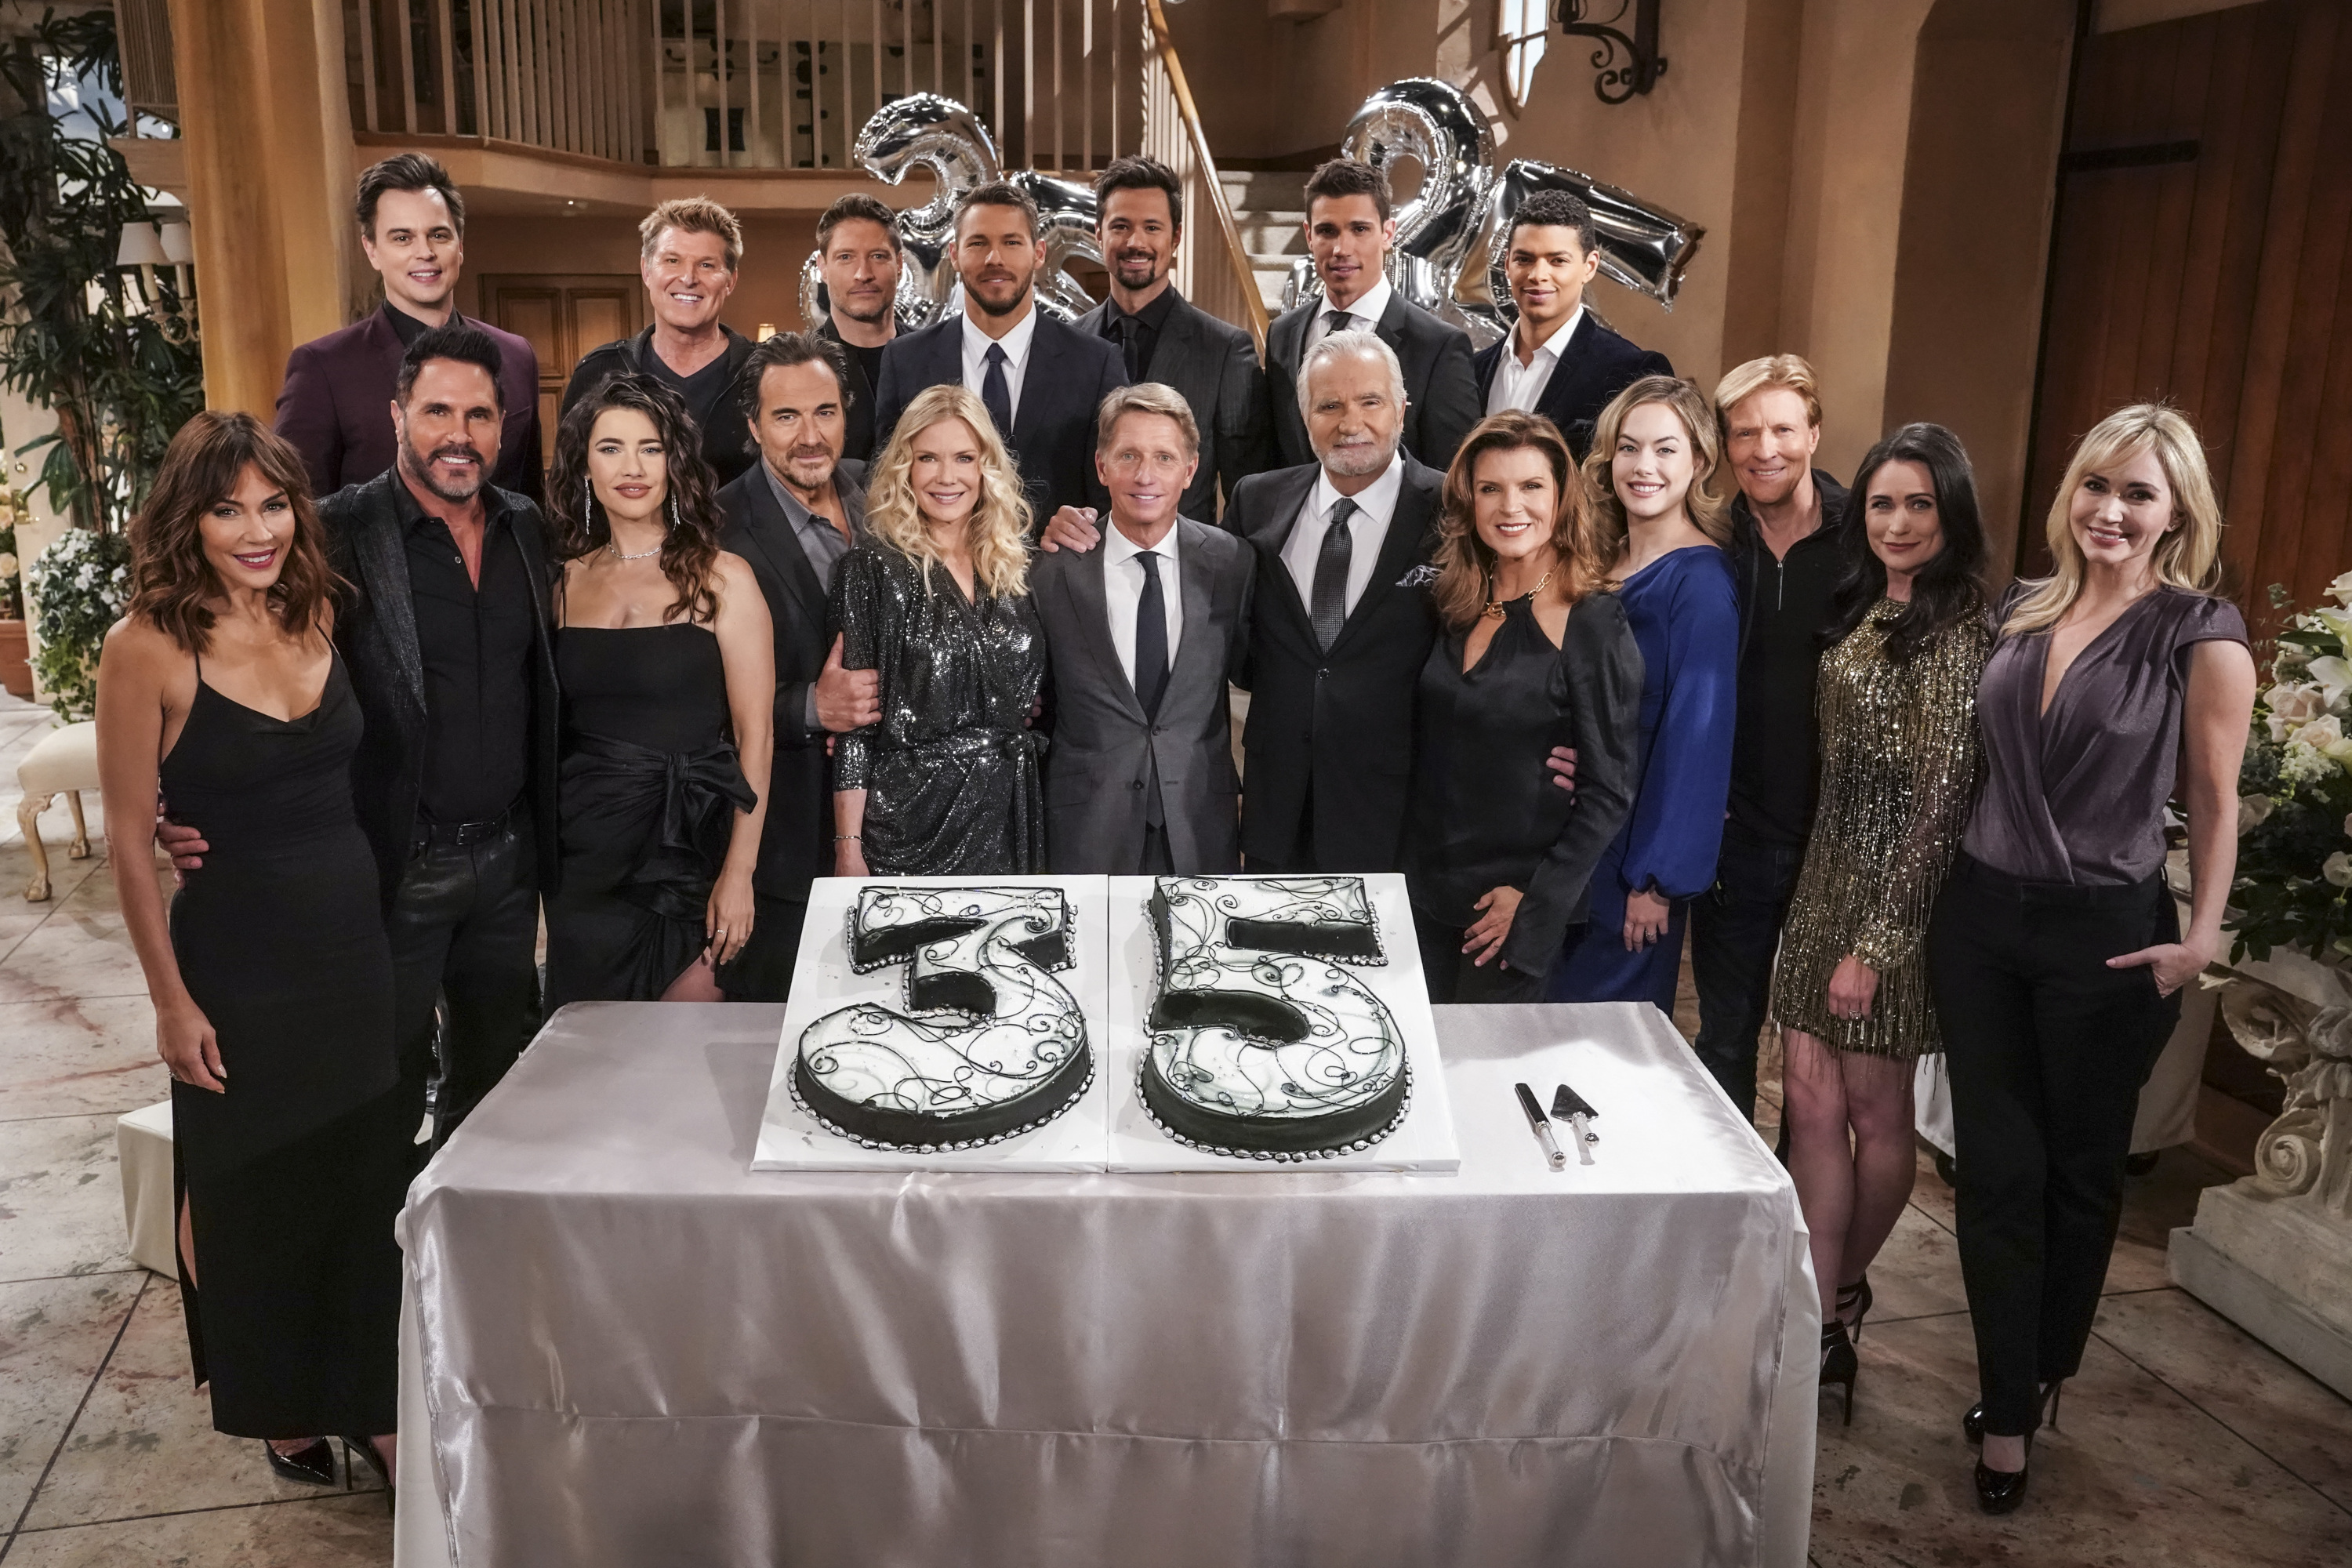 'The Bold and the Beautiful' cast celebrating the show's 35th anniversary.